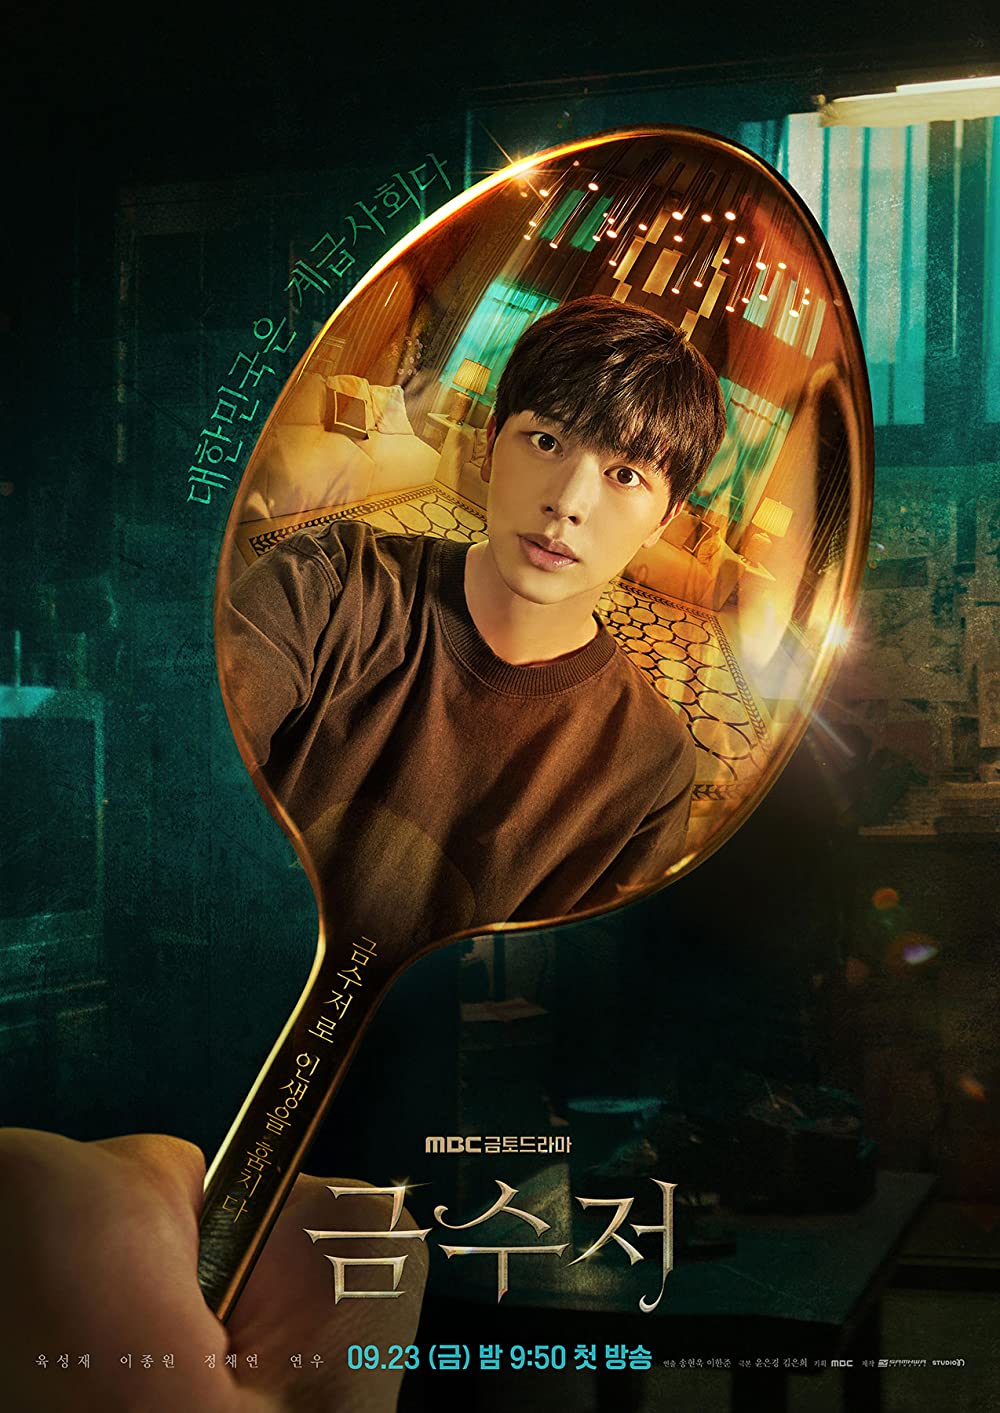 Golden Spoon TV Series (2022) Cast, Release Date, Episodes, Story, Review, Poster, Trailer
